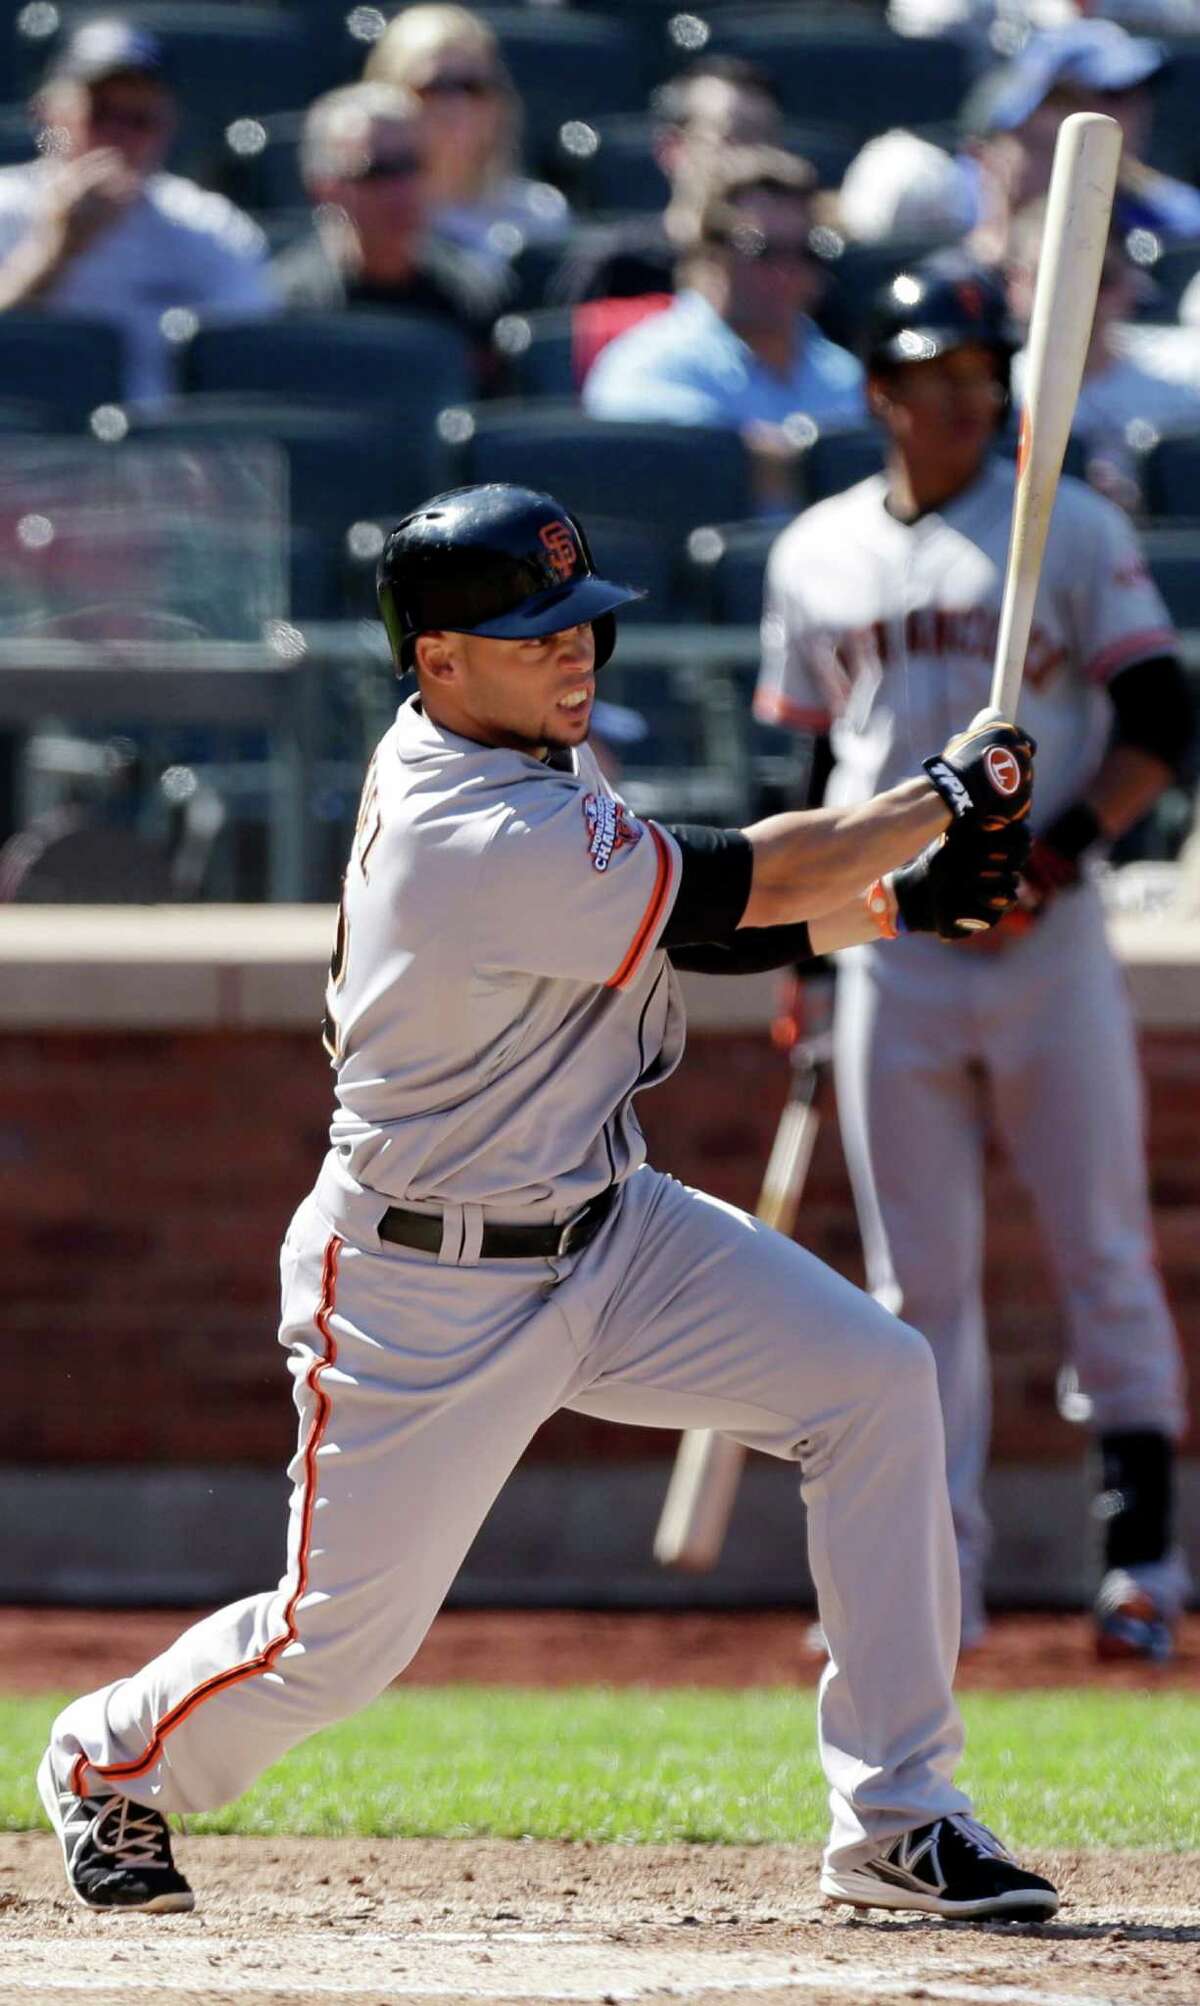 San Francisco Giants' Juan Perez hits an RBI single during the fourth inning of a baseball game against the New York Mets Thursday, Sept. 19, 2013, in New York. (AP Photo/Frank Franklin II) ORG XMIT: NYM106